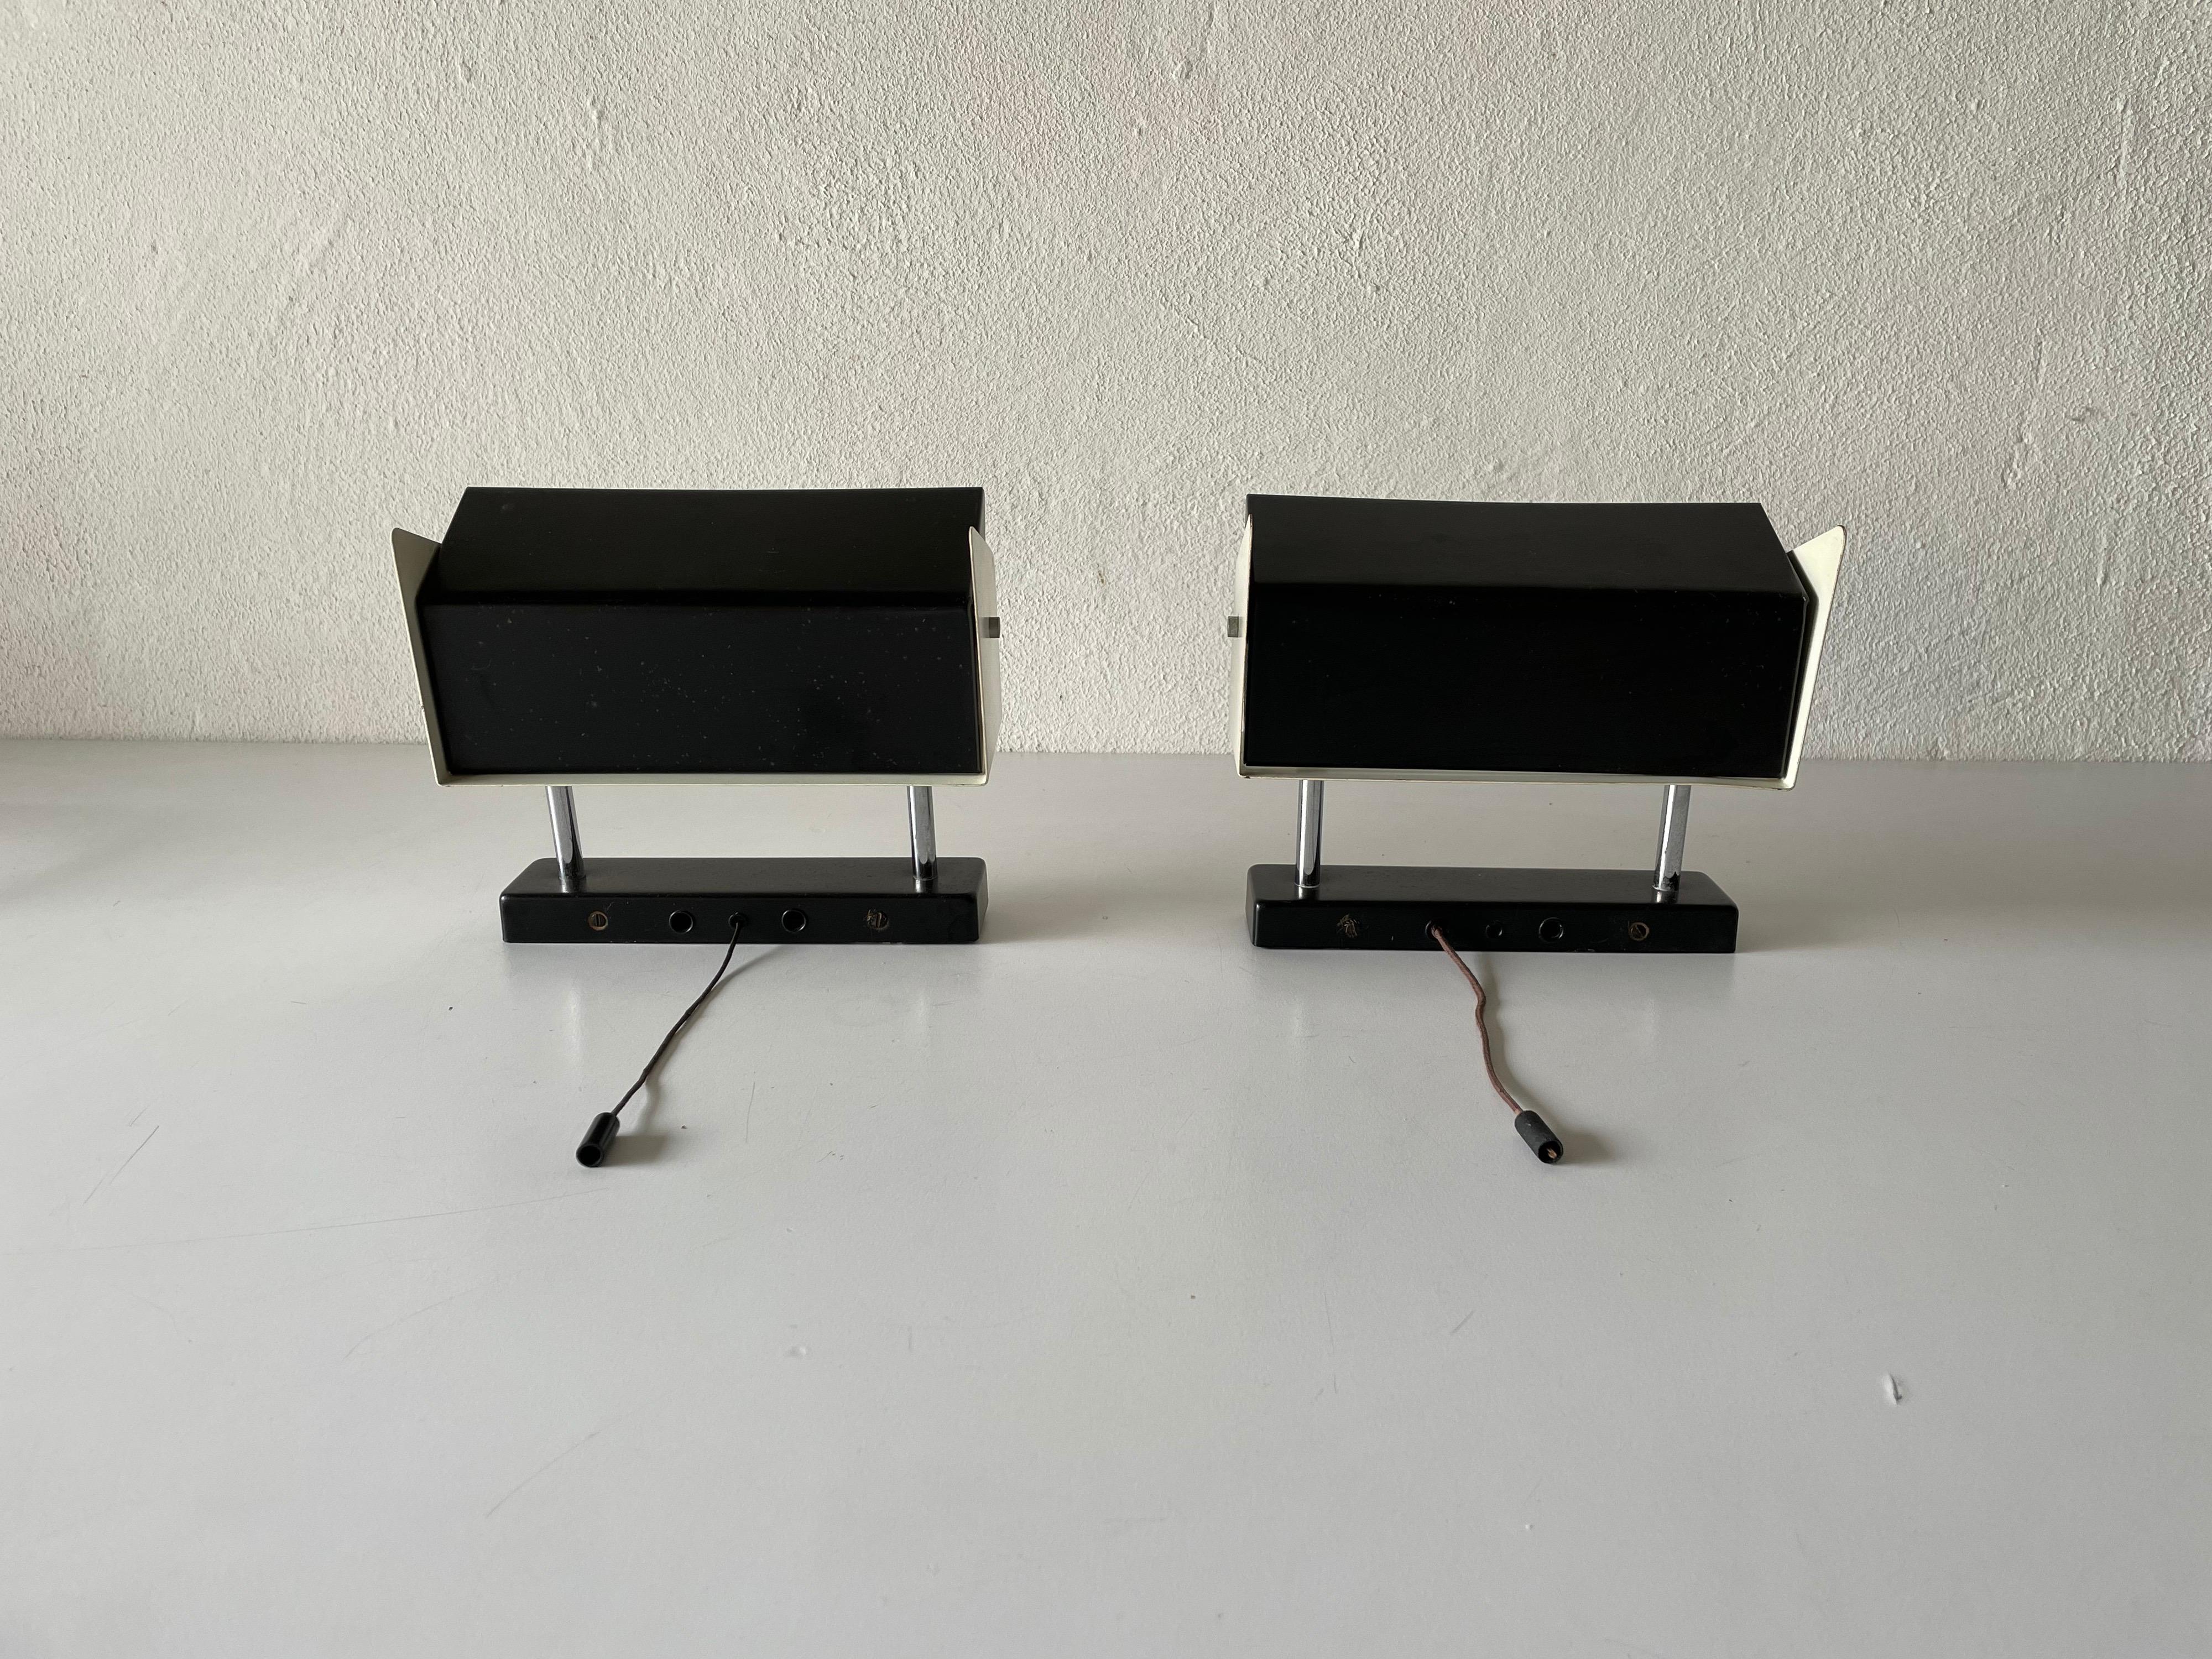 Black-white metal adjustable shade Industrial pair of sconces by Staff, 1950s, Germany

Adjustable Reflectors

Very elegant and Minimalist wall lamps.
There are two switch on-off ropes 

Lamps are in very good condition.

These lamps works